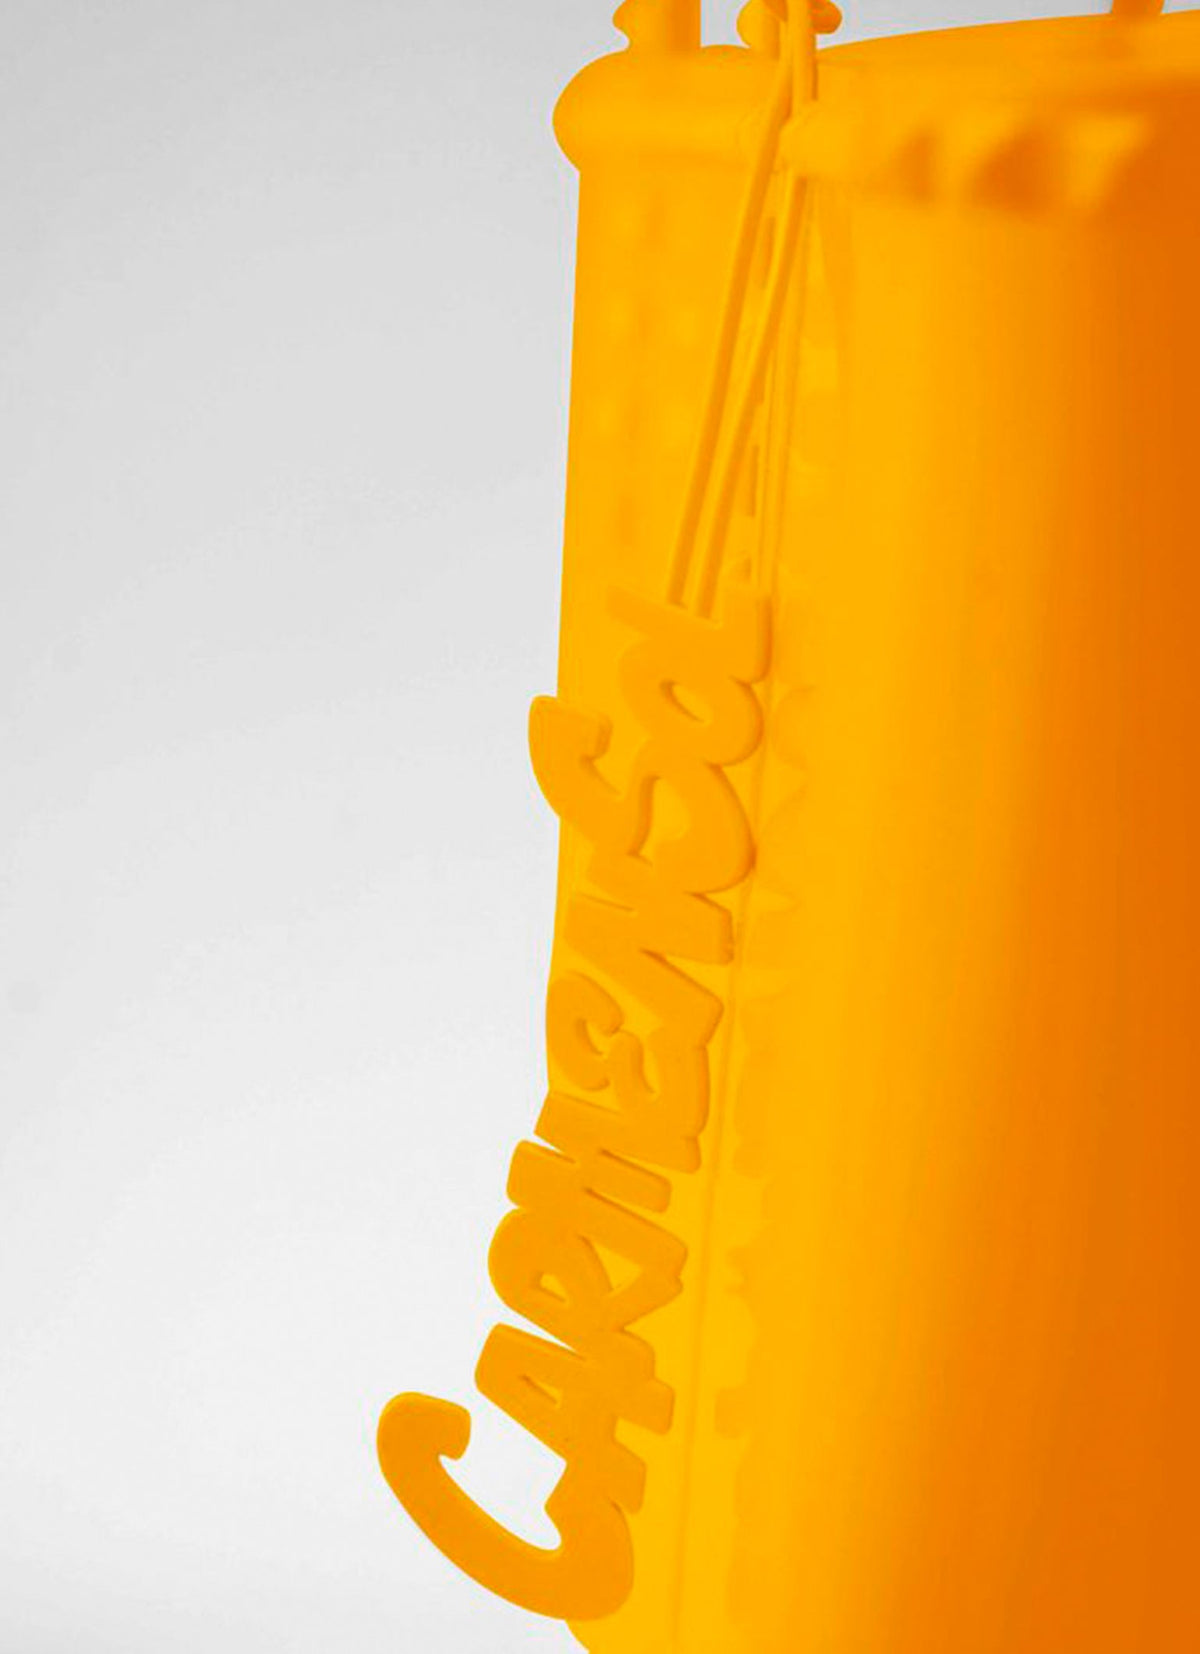 Carmen Sol jelly charm purses in color yellow which are vegan on sale